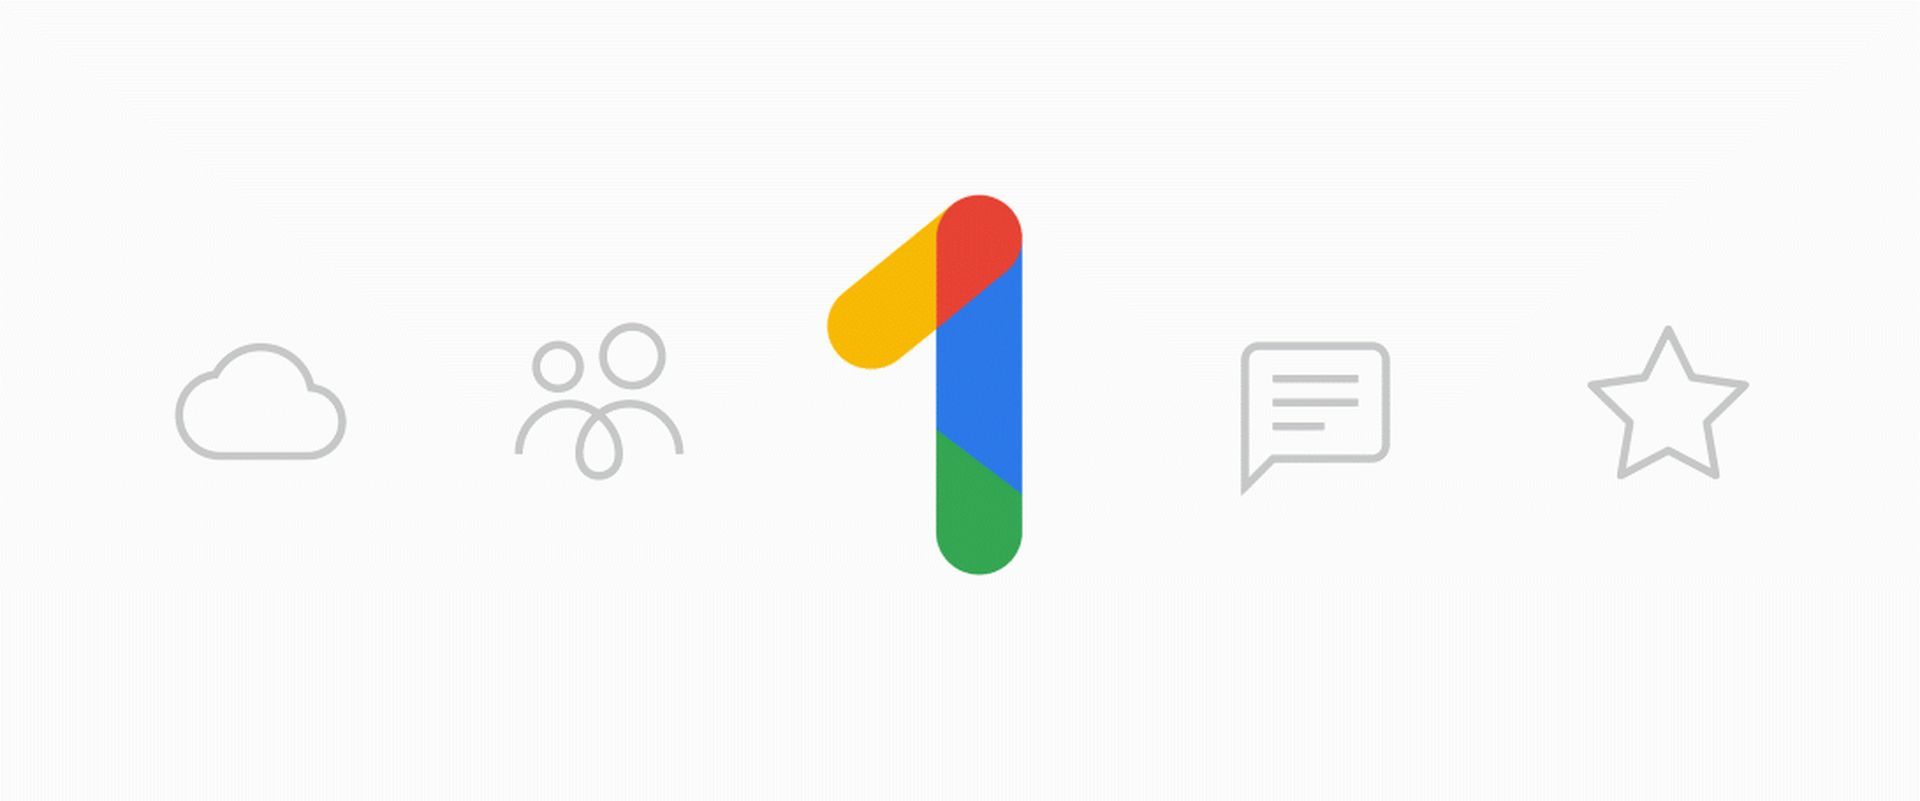 Google has bundled solutions to many of your needs into a single package